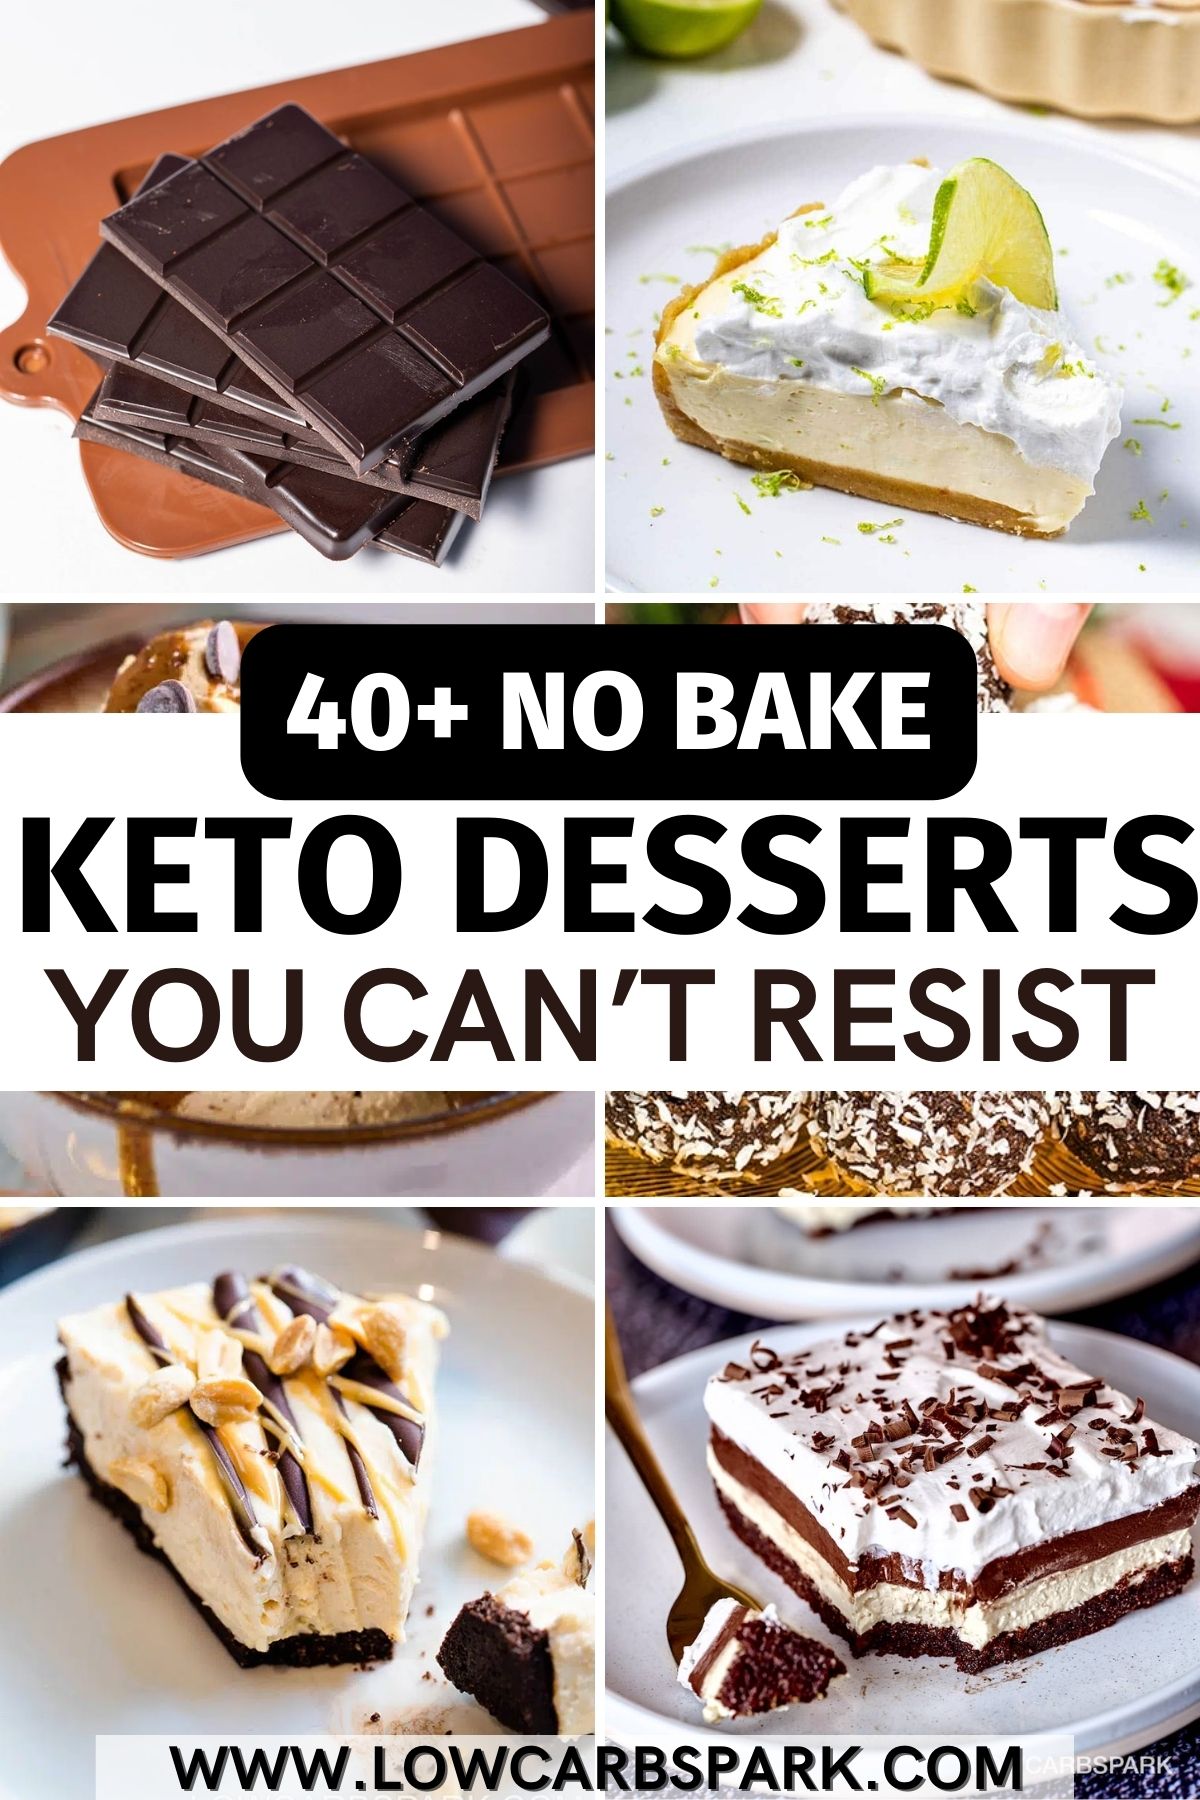 40+ No-Bake Desserts You Can't Resist